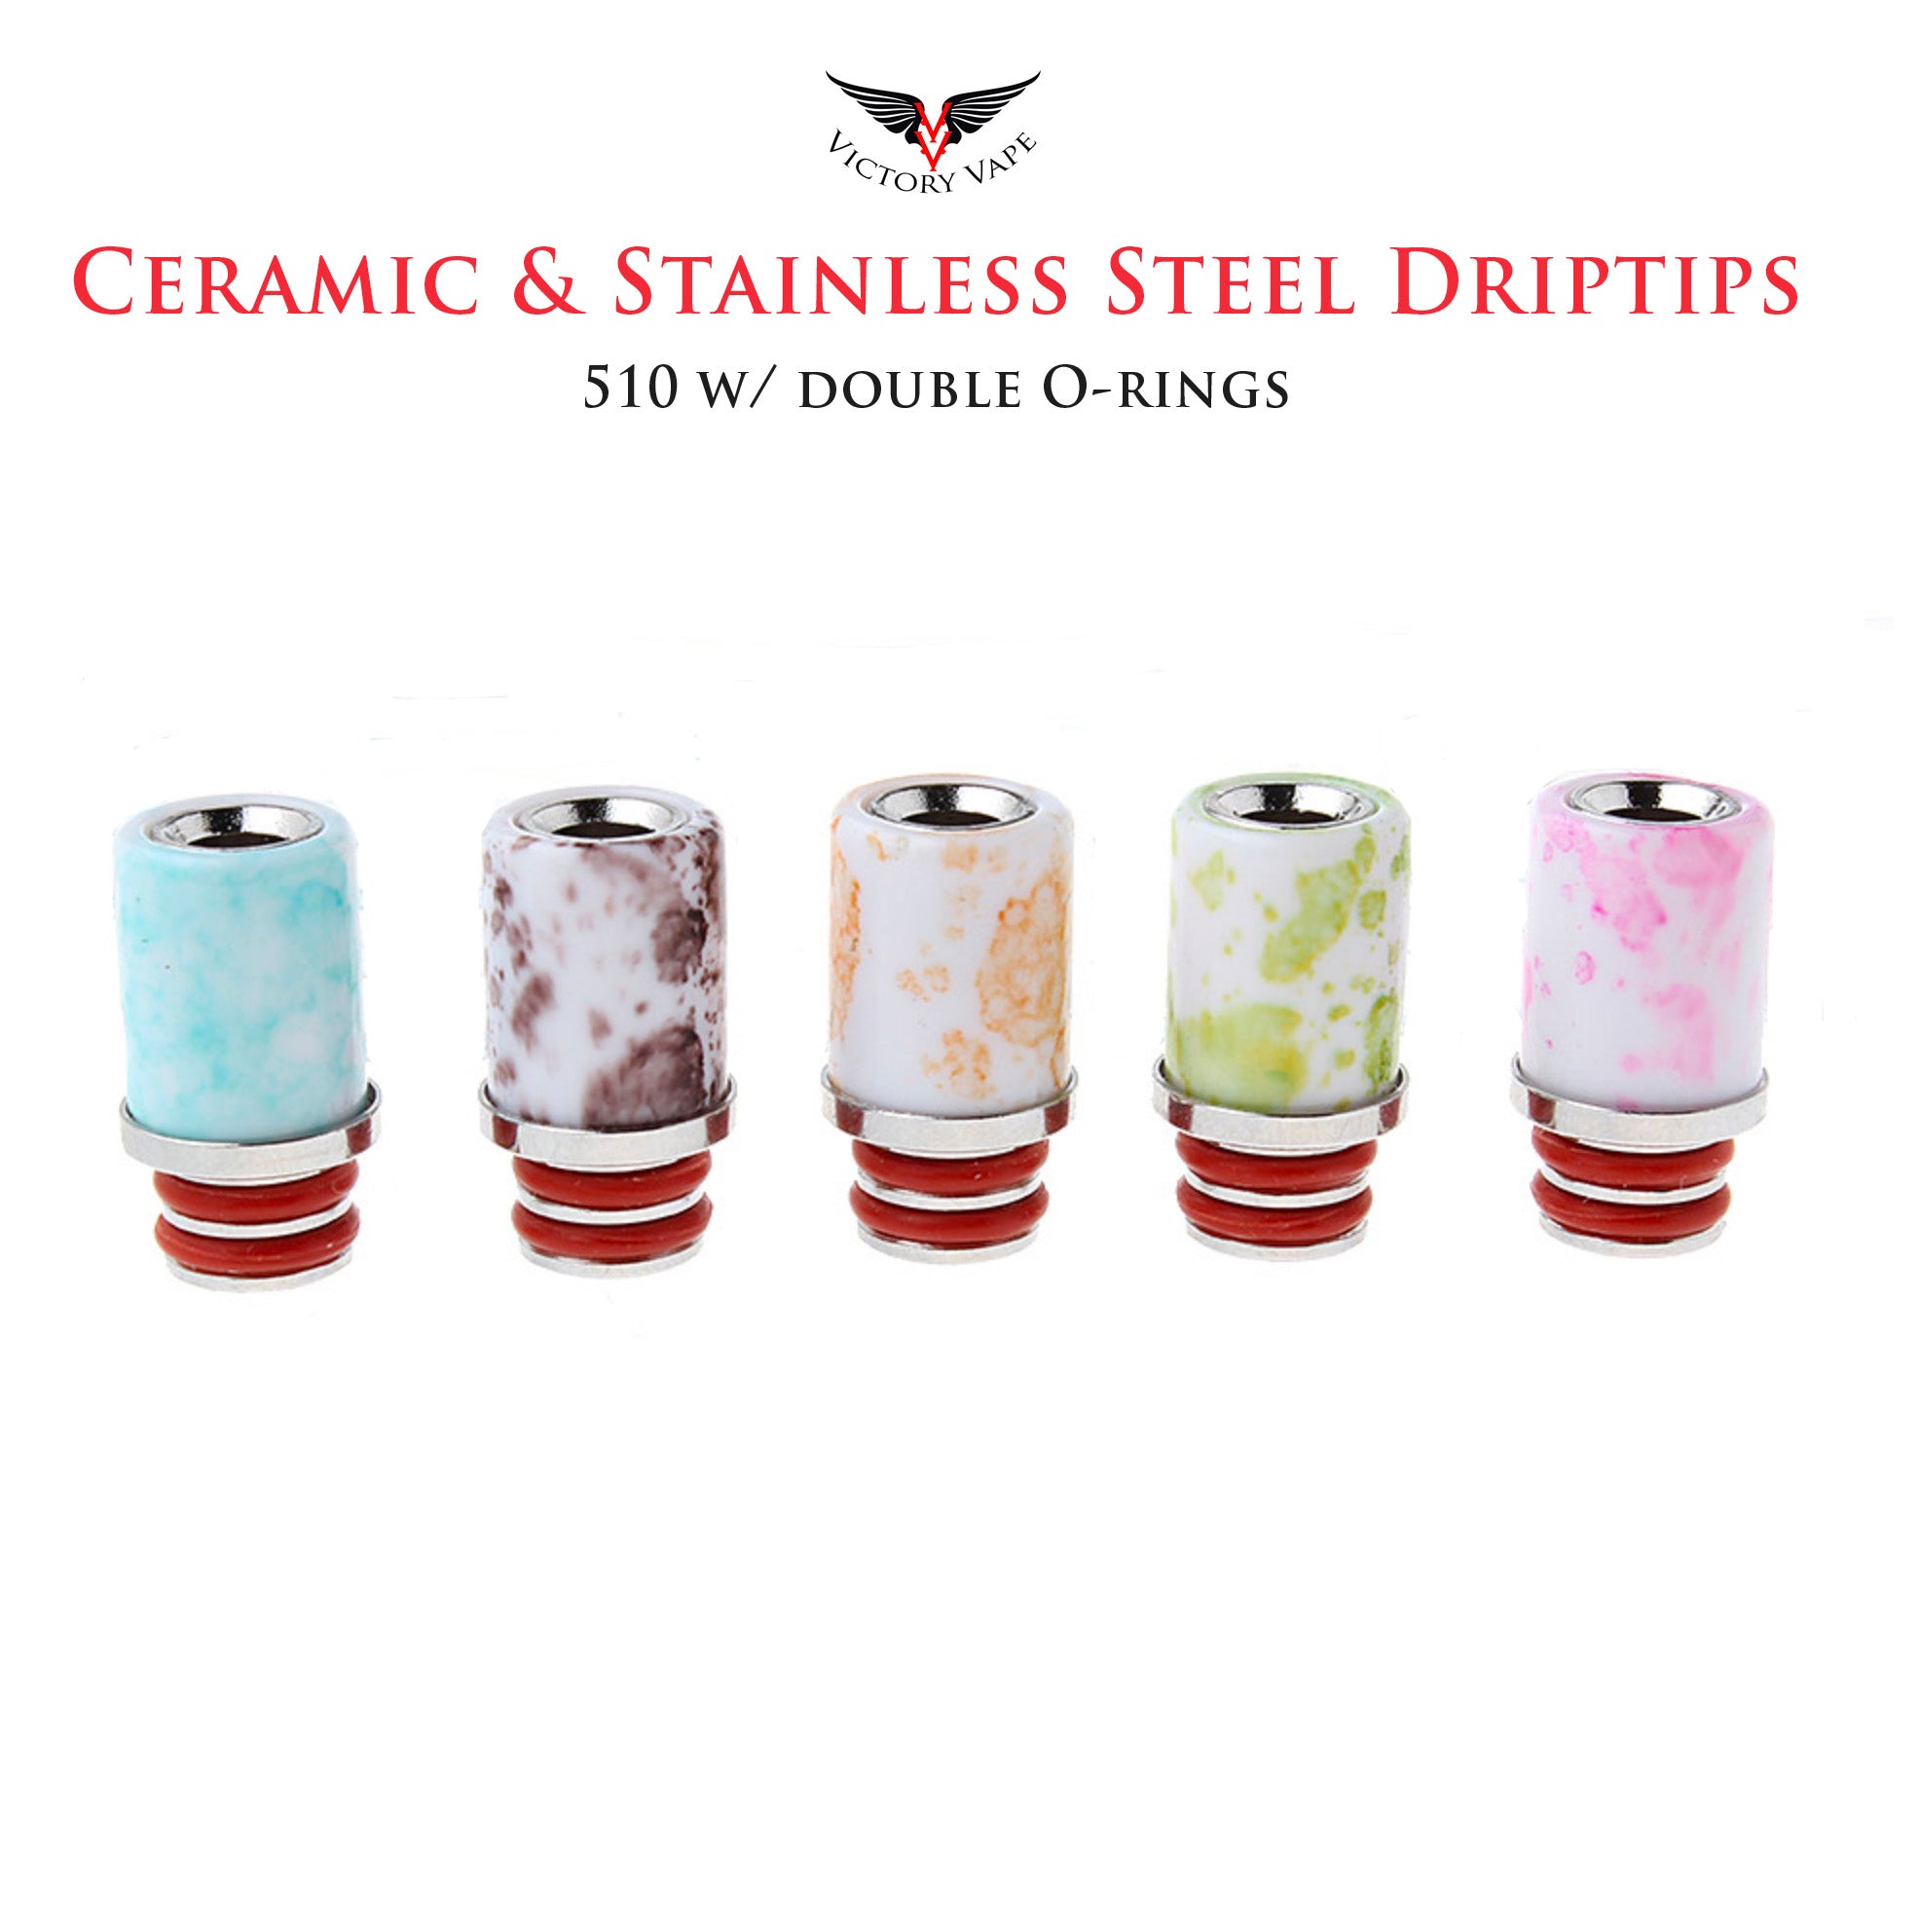  Ceramic and Stainless Steel Driptip • 510 